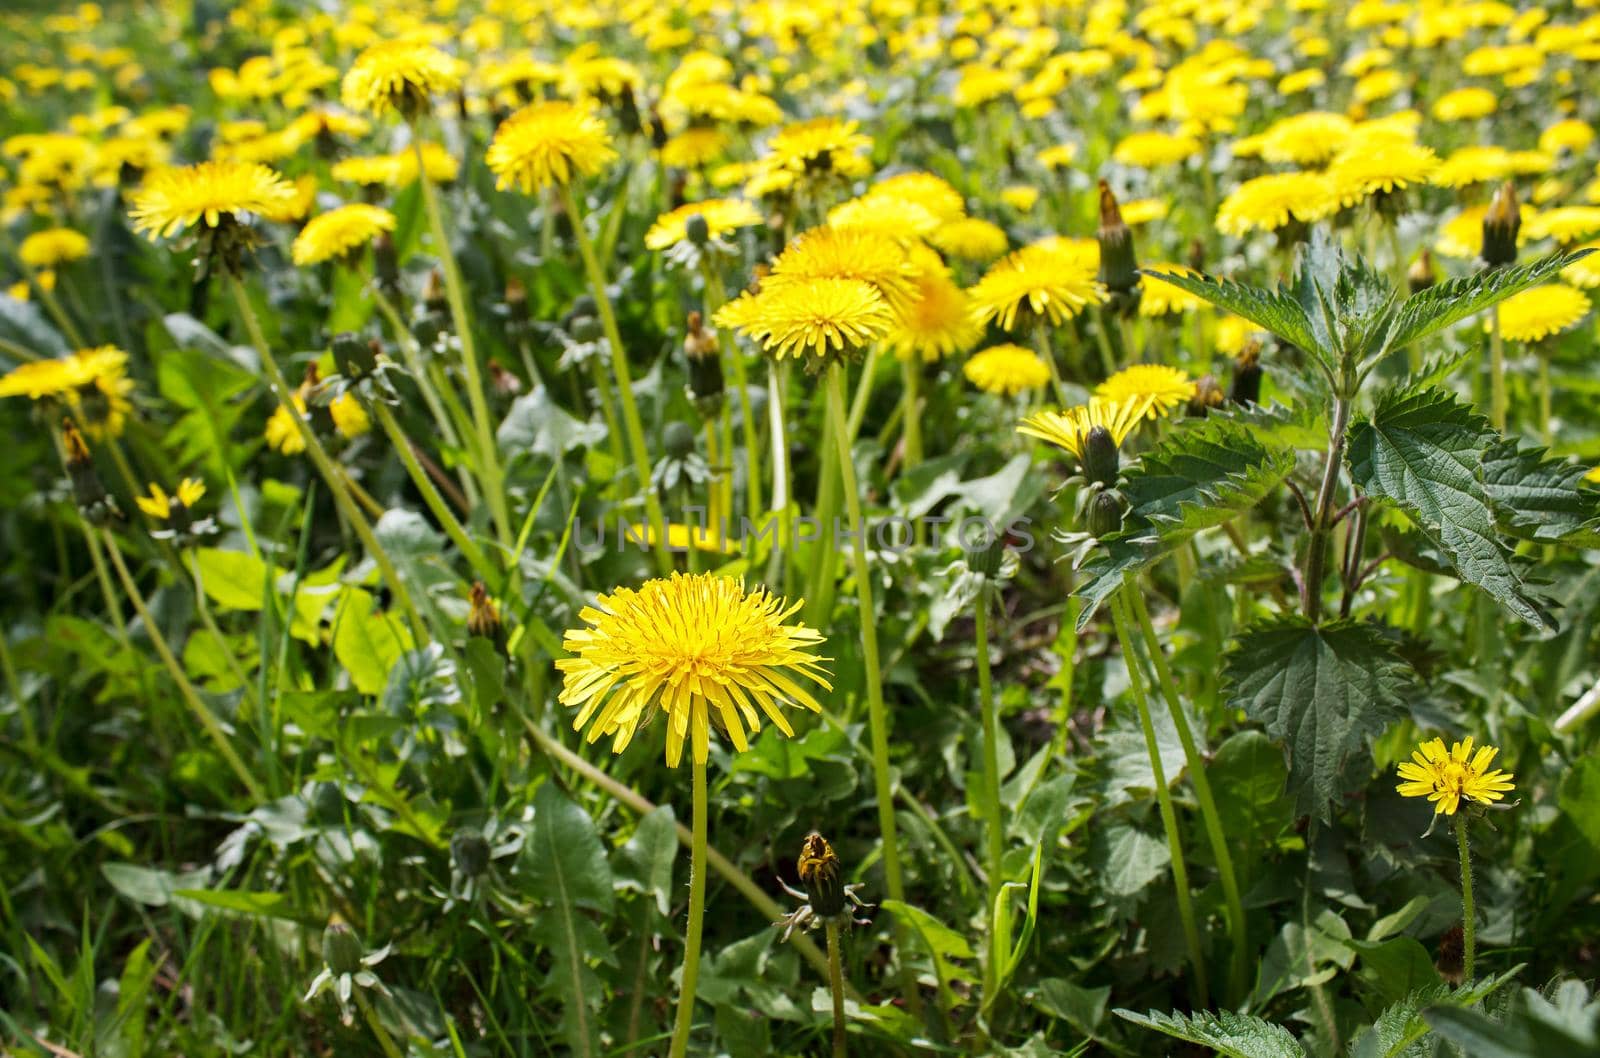 bright yellow dandelions in the field on sunny day